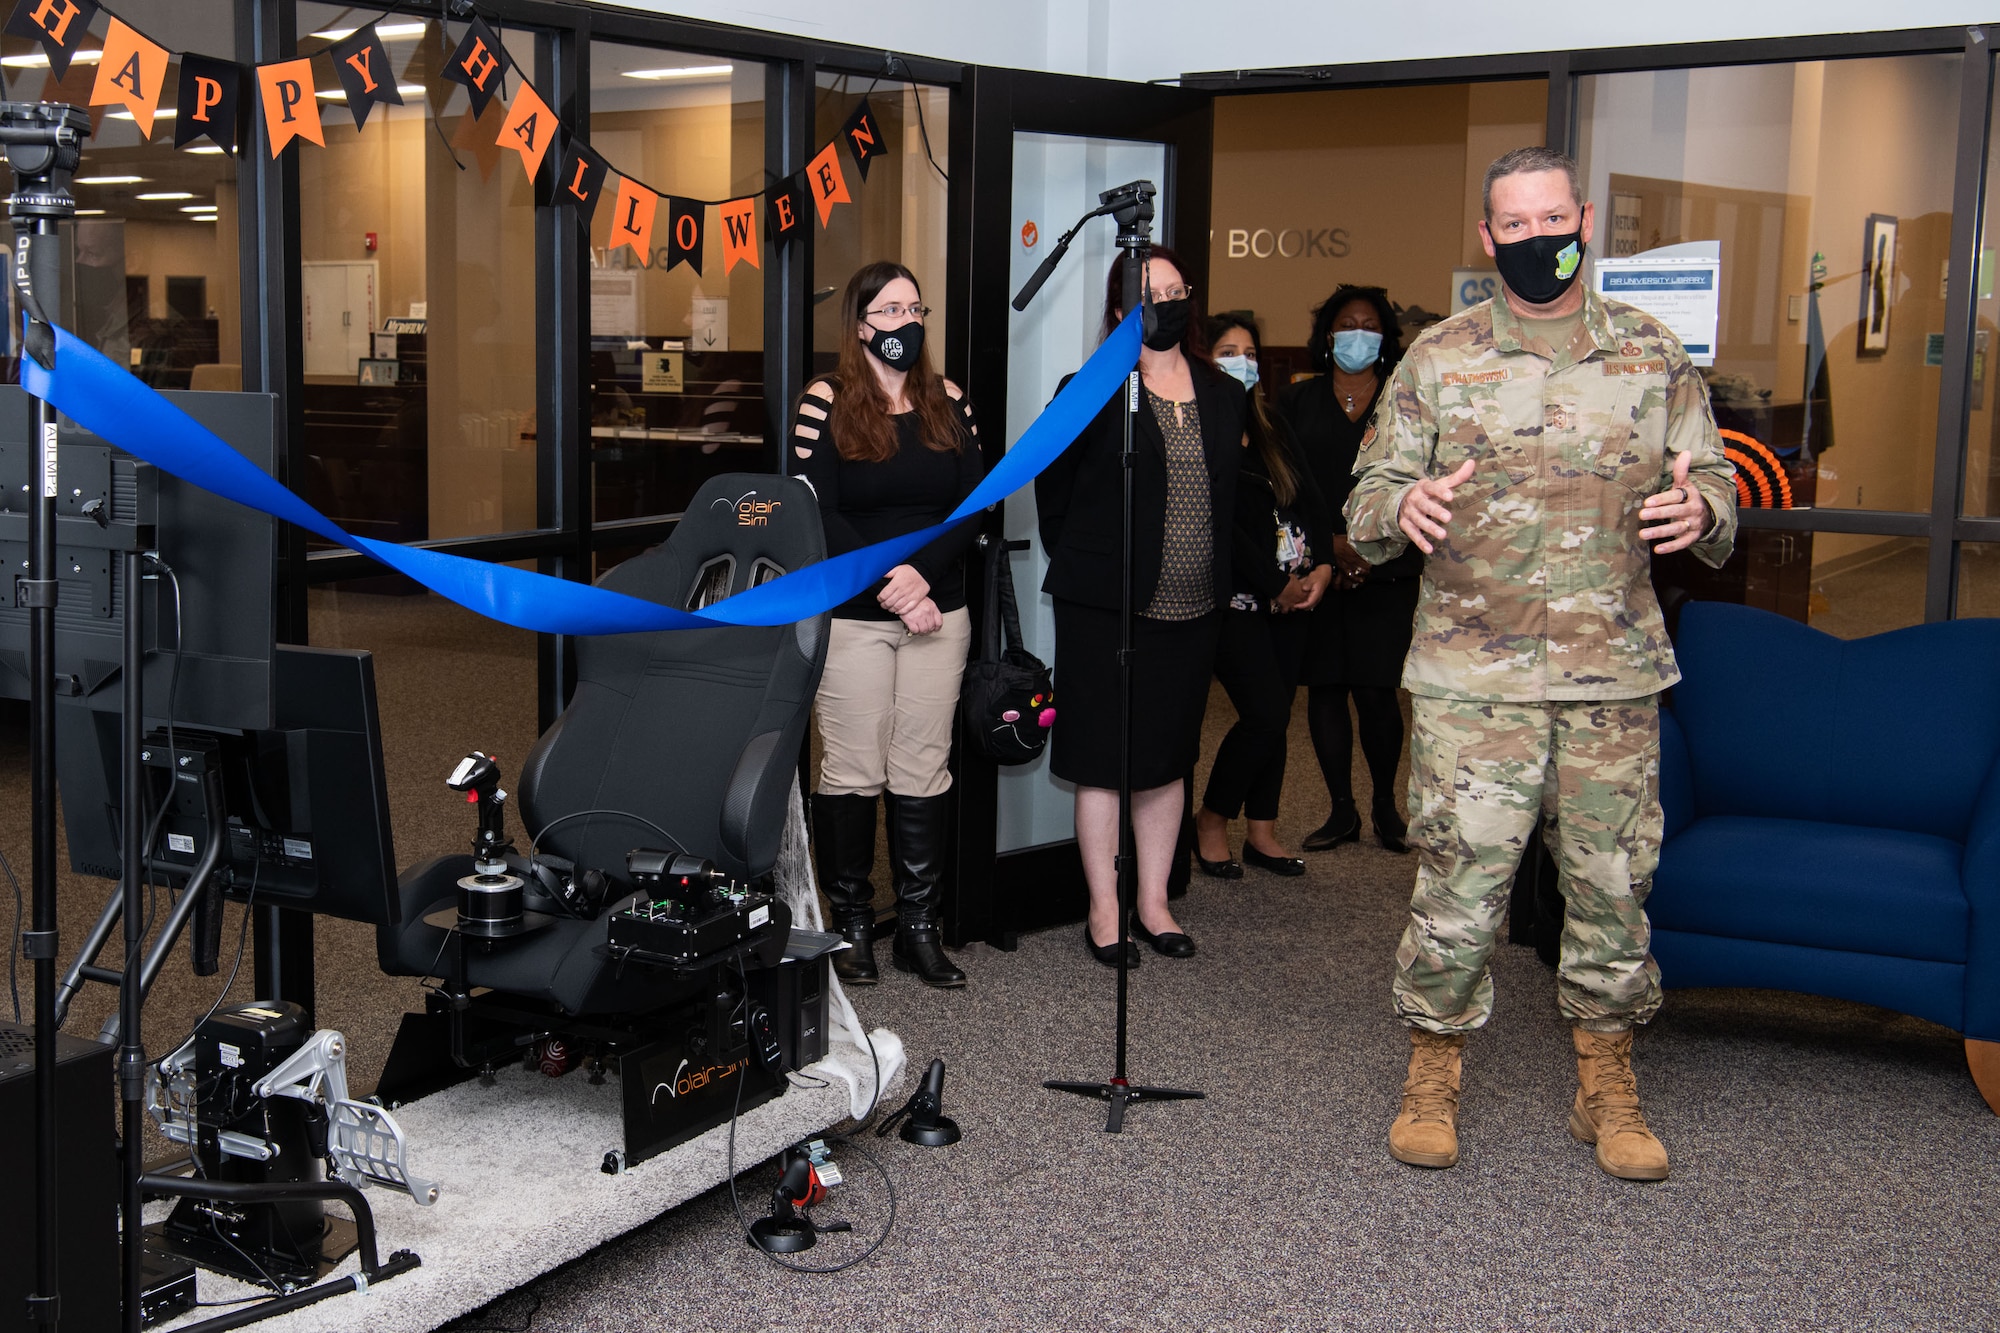 Maxwell AFB, Ala. - Air University Library and Immersive Learning and Simulation Research Task Force host a ribbon cutting for the new Pilot Training NEXT simulator October 28th 2021 in the Library’s Innovation Lab. (U.S. Air Force photo by William Birchfield)